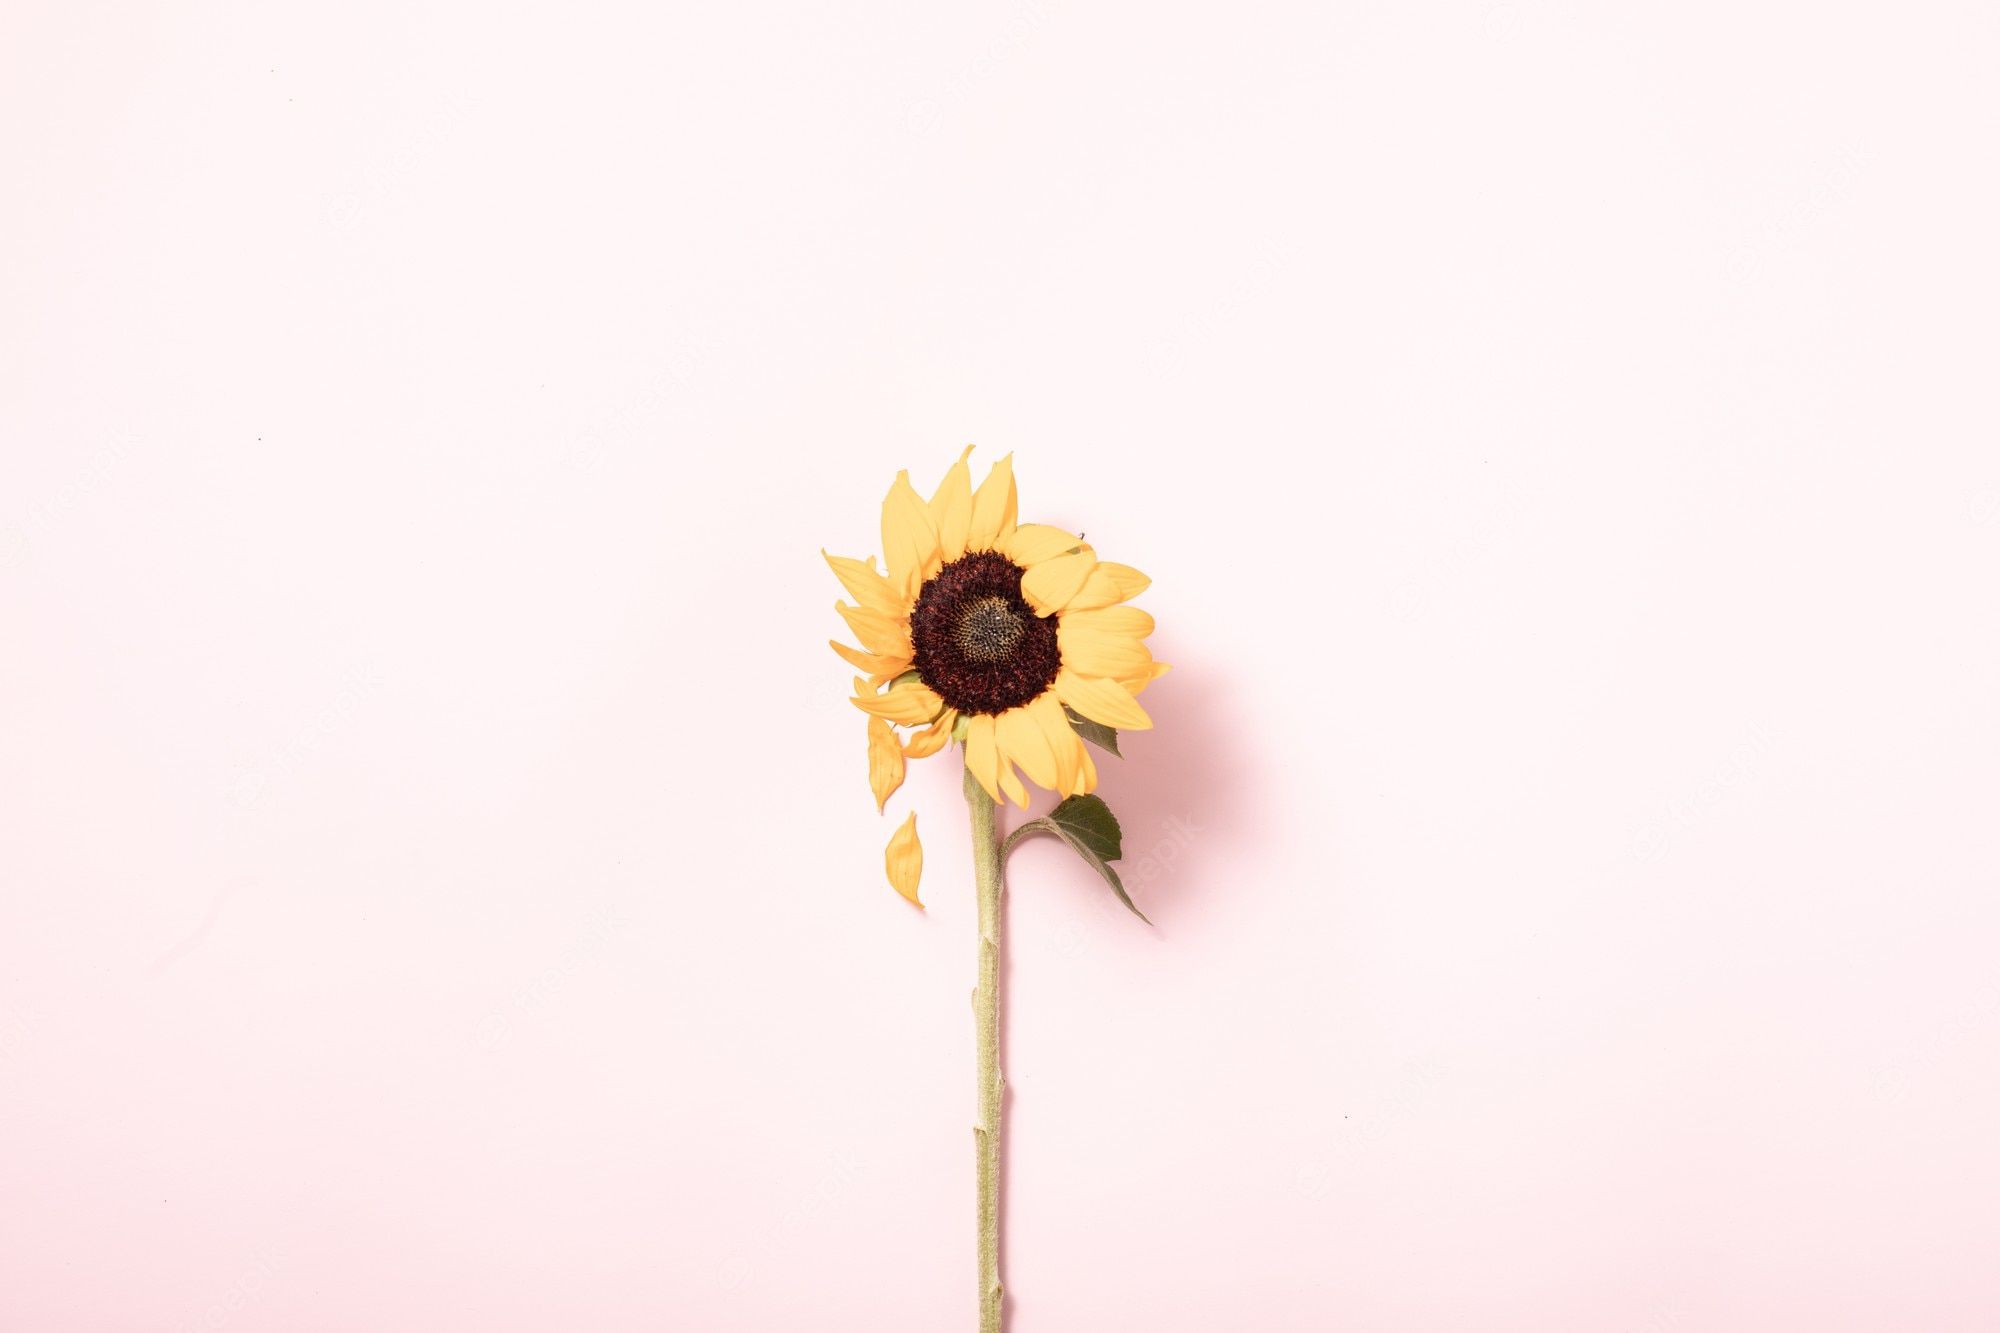 A single sunflower in front of pink wall - Sunflower